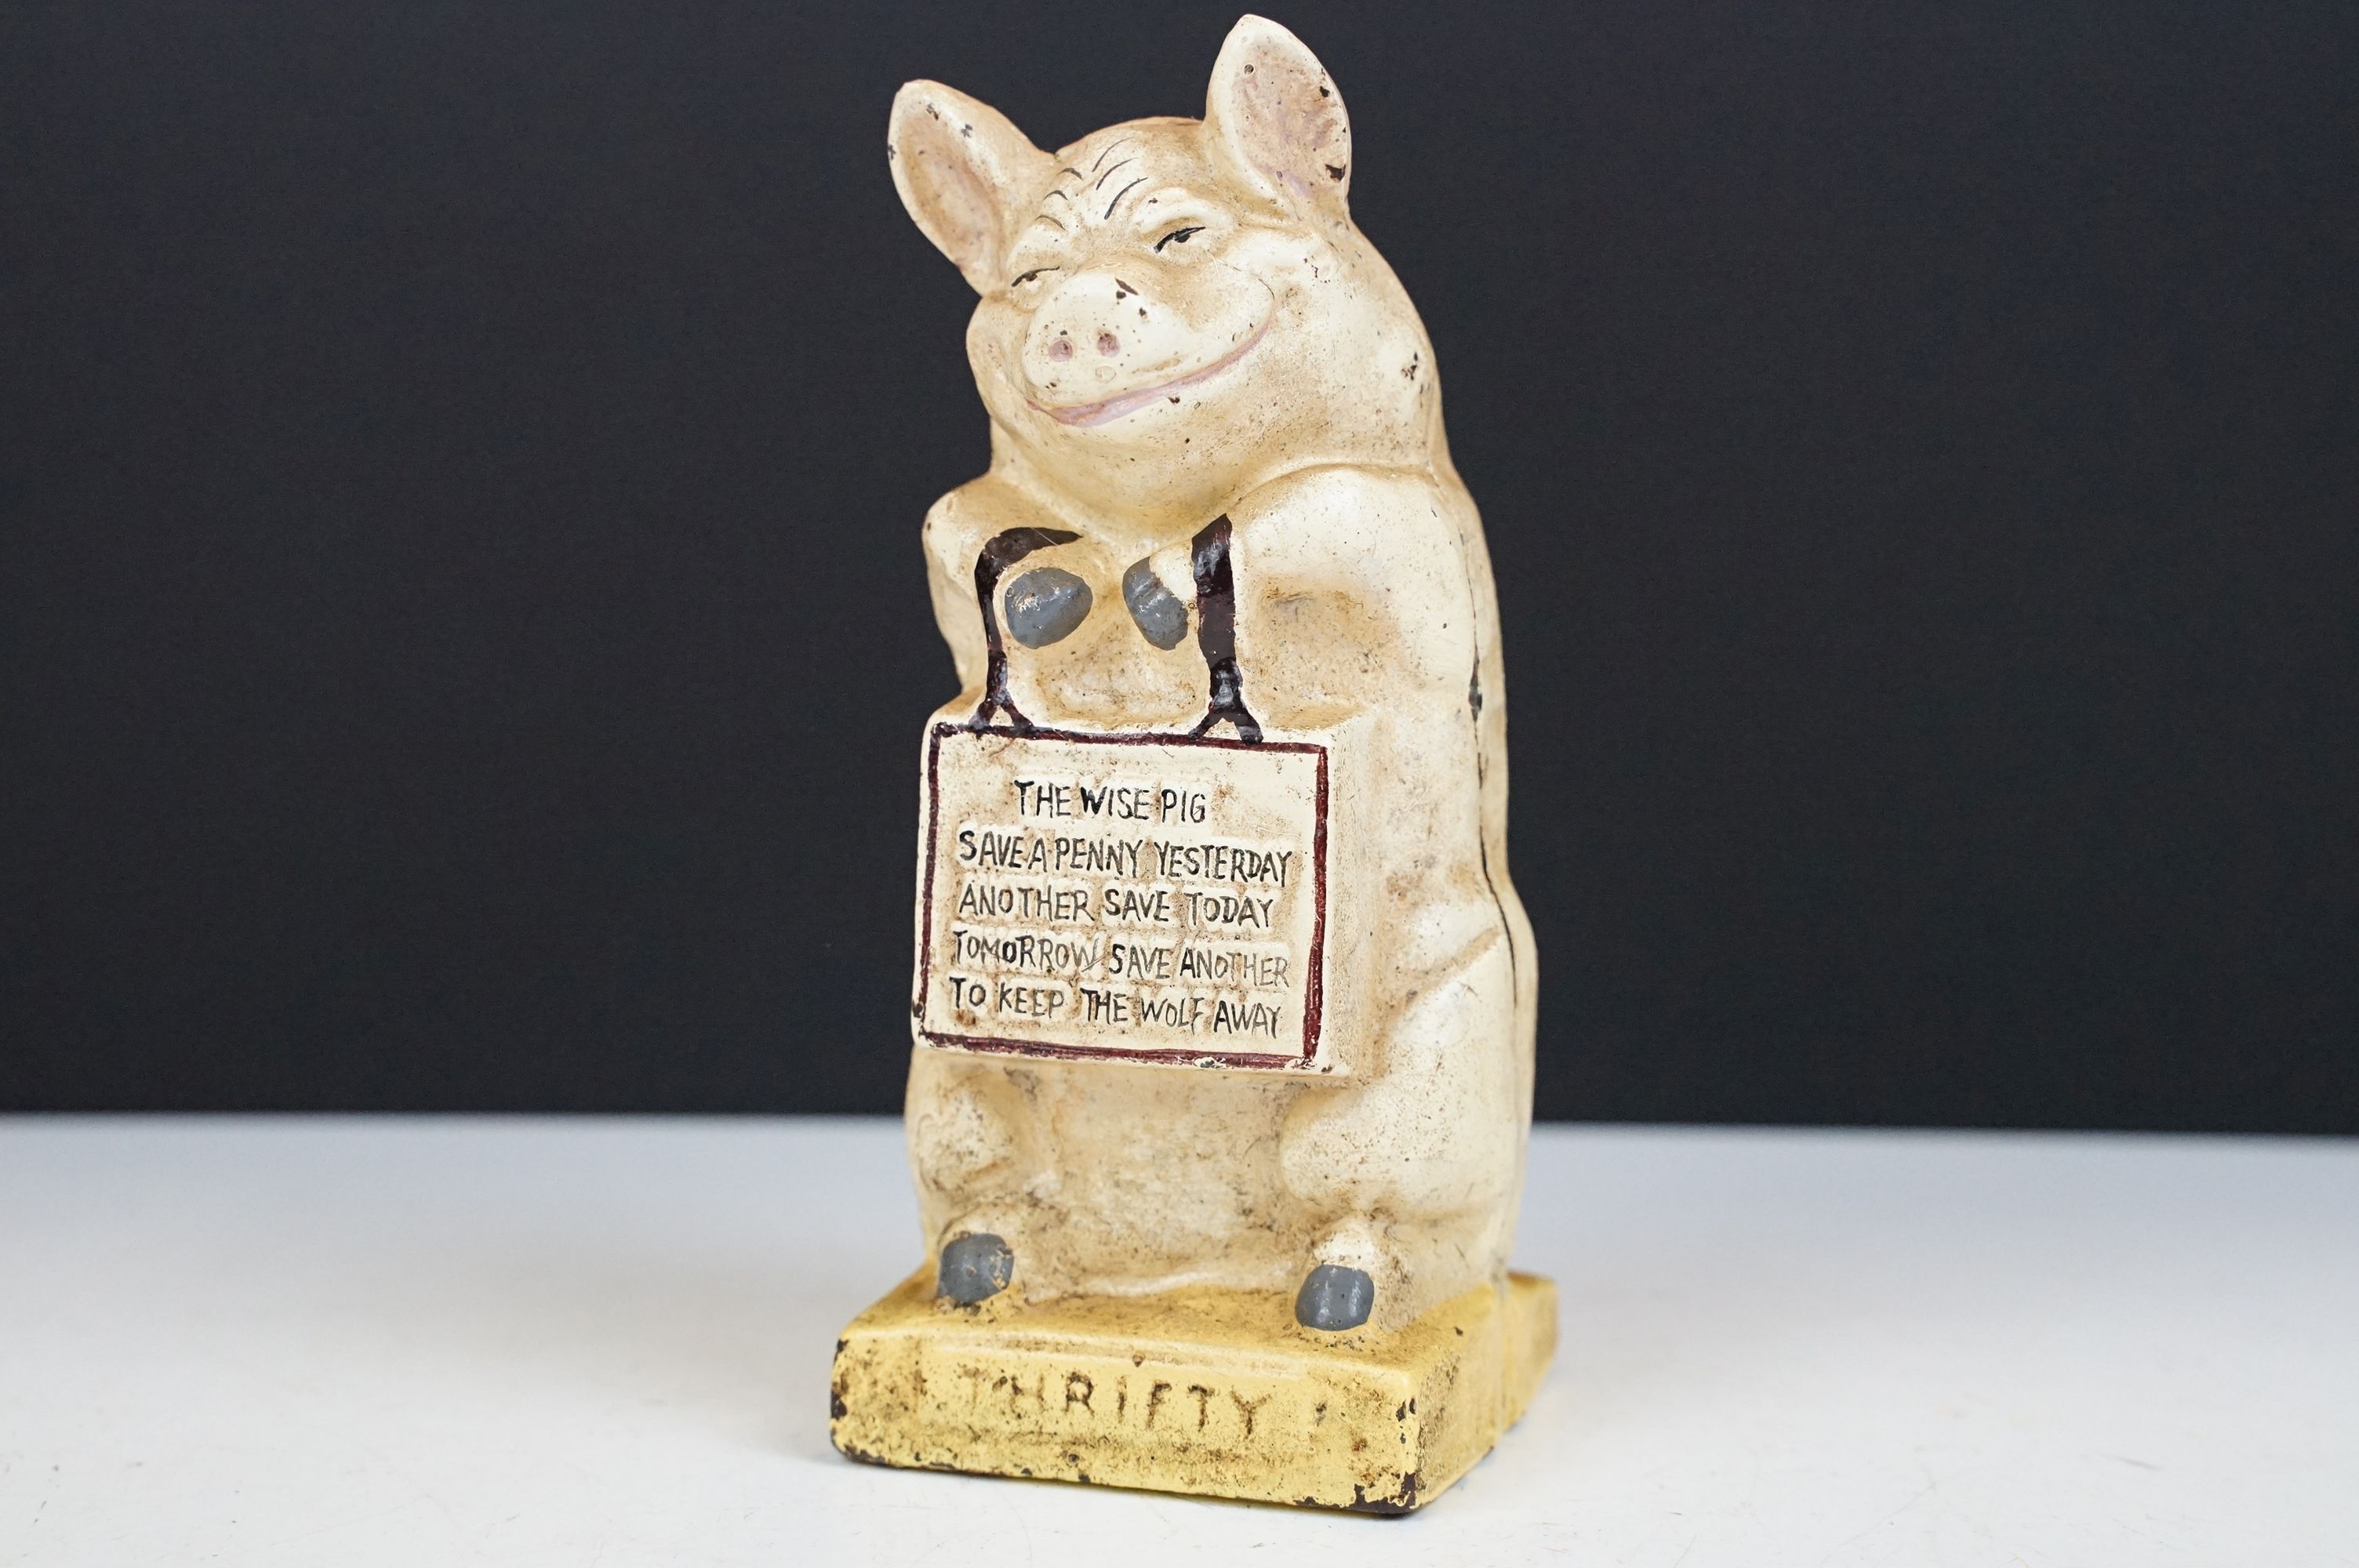 Vintage cast iron ' Thrifty ' money savings bank modelled as a pig, approx 16cm tall